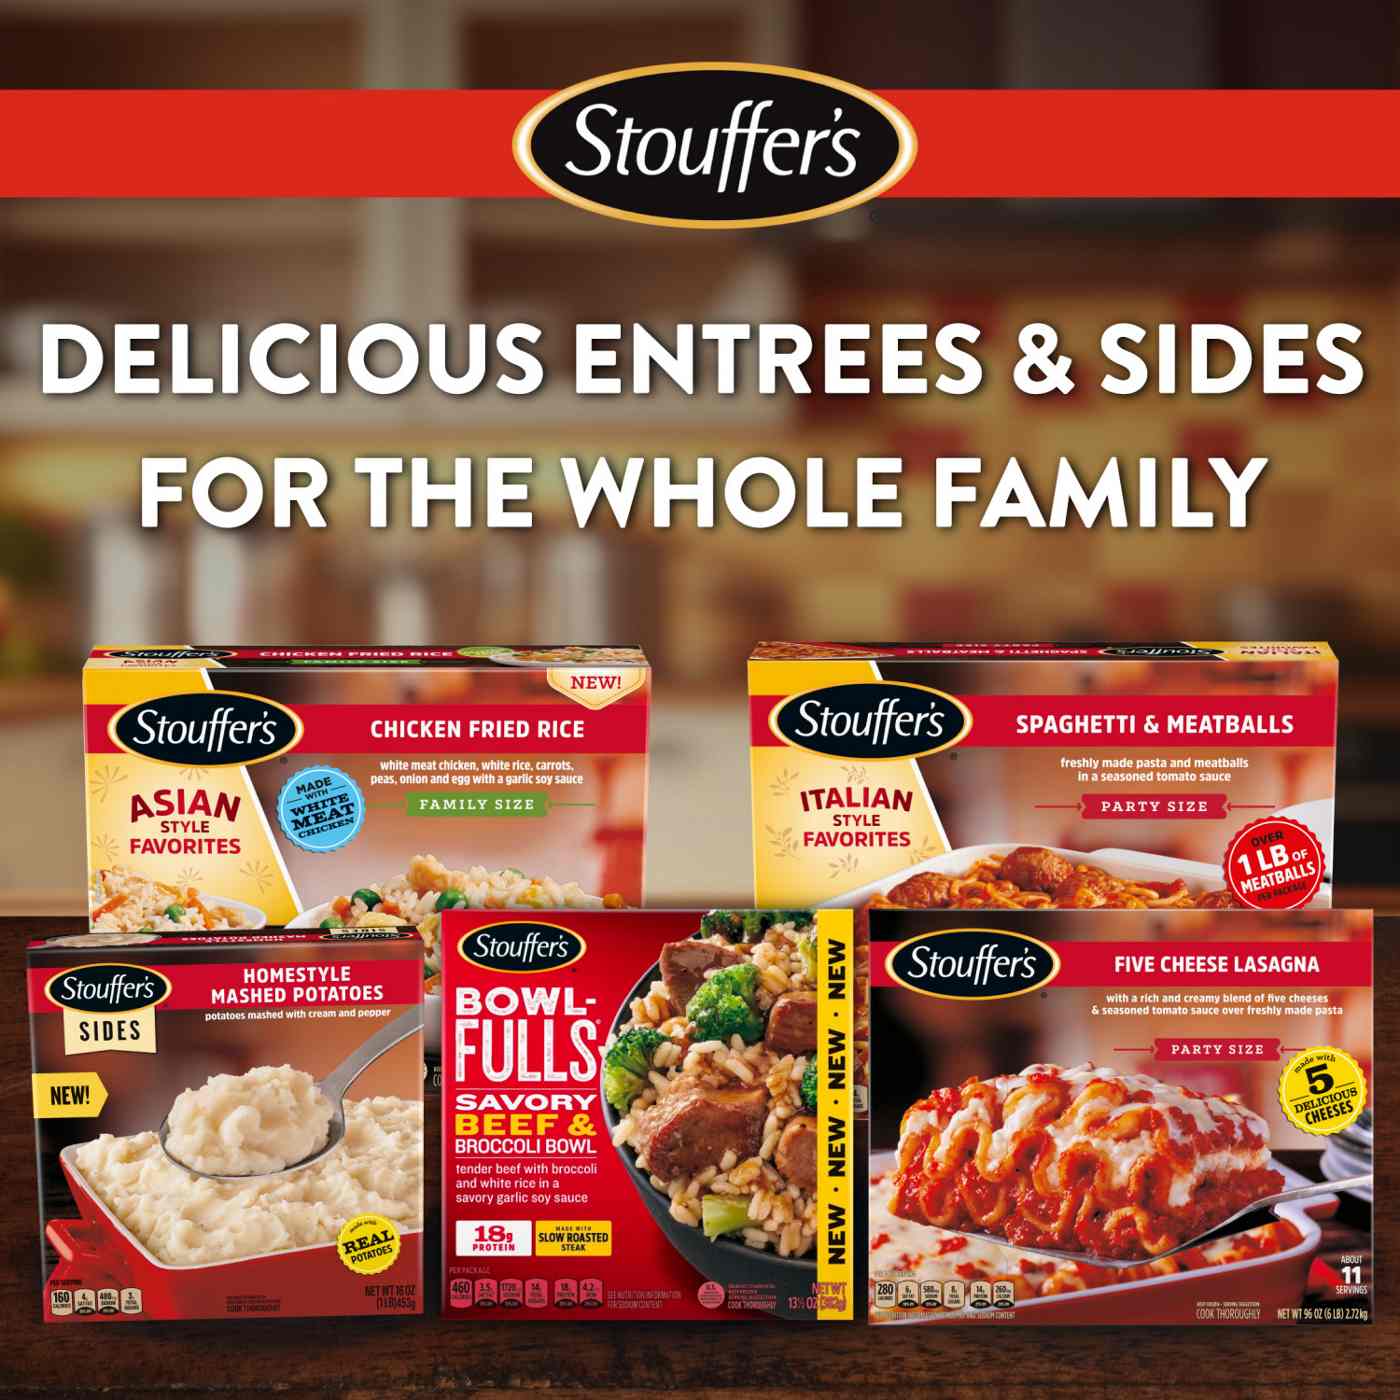 Stouffer's Frozen 5 Cheese Lasagna - Party-Size; image 5 of 7